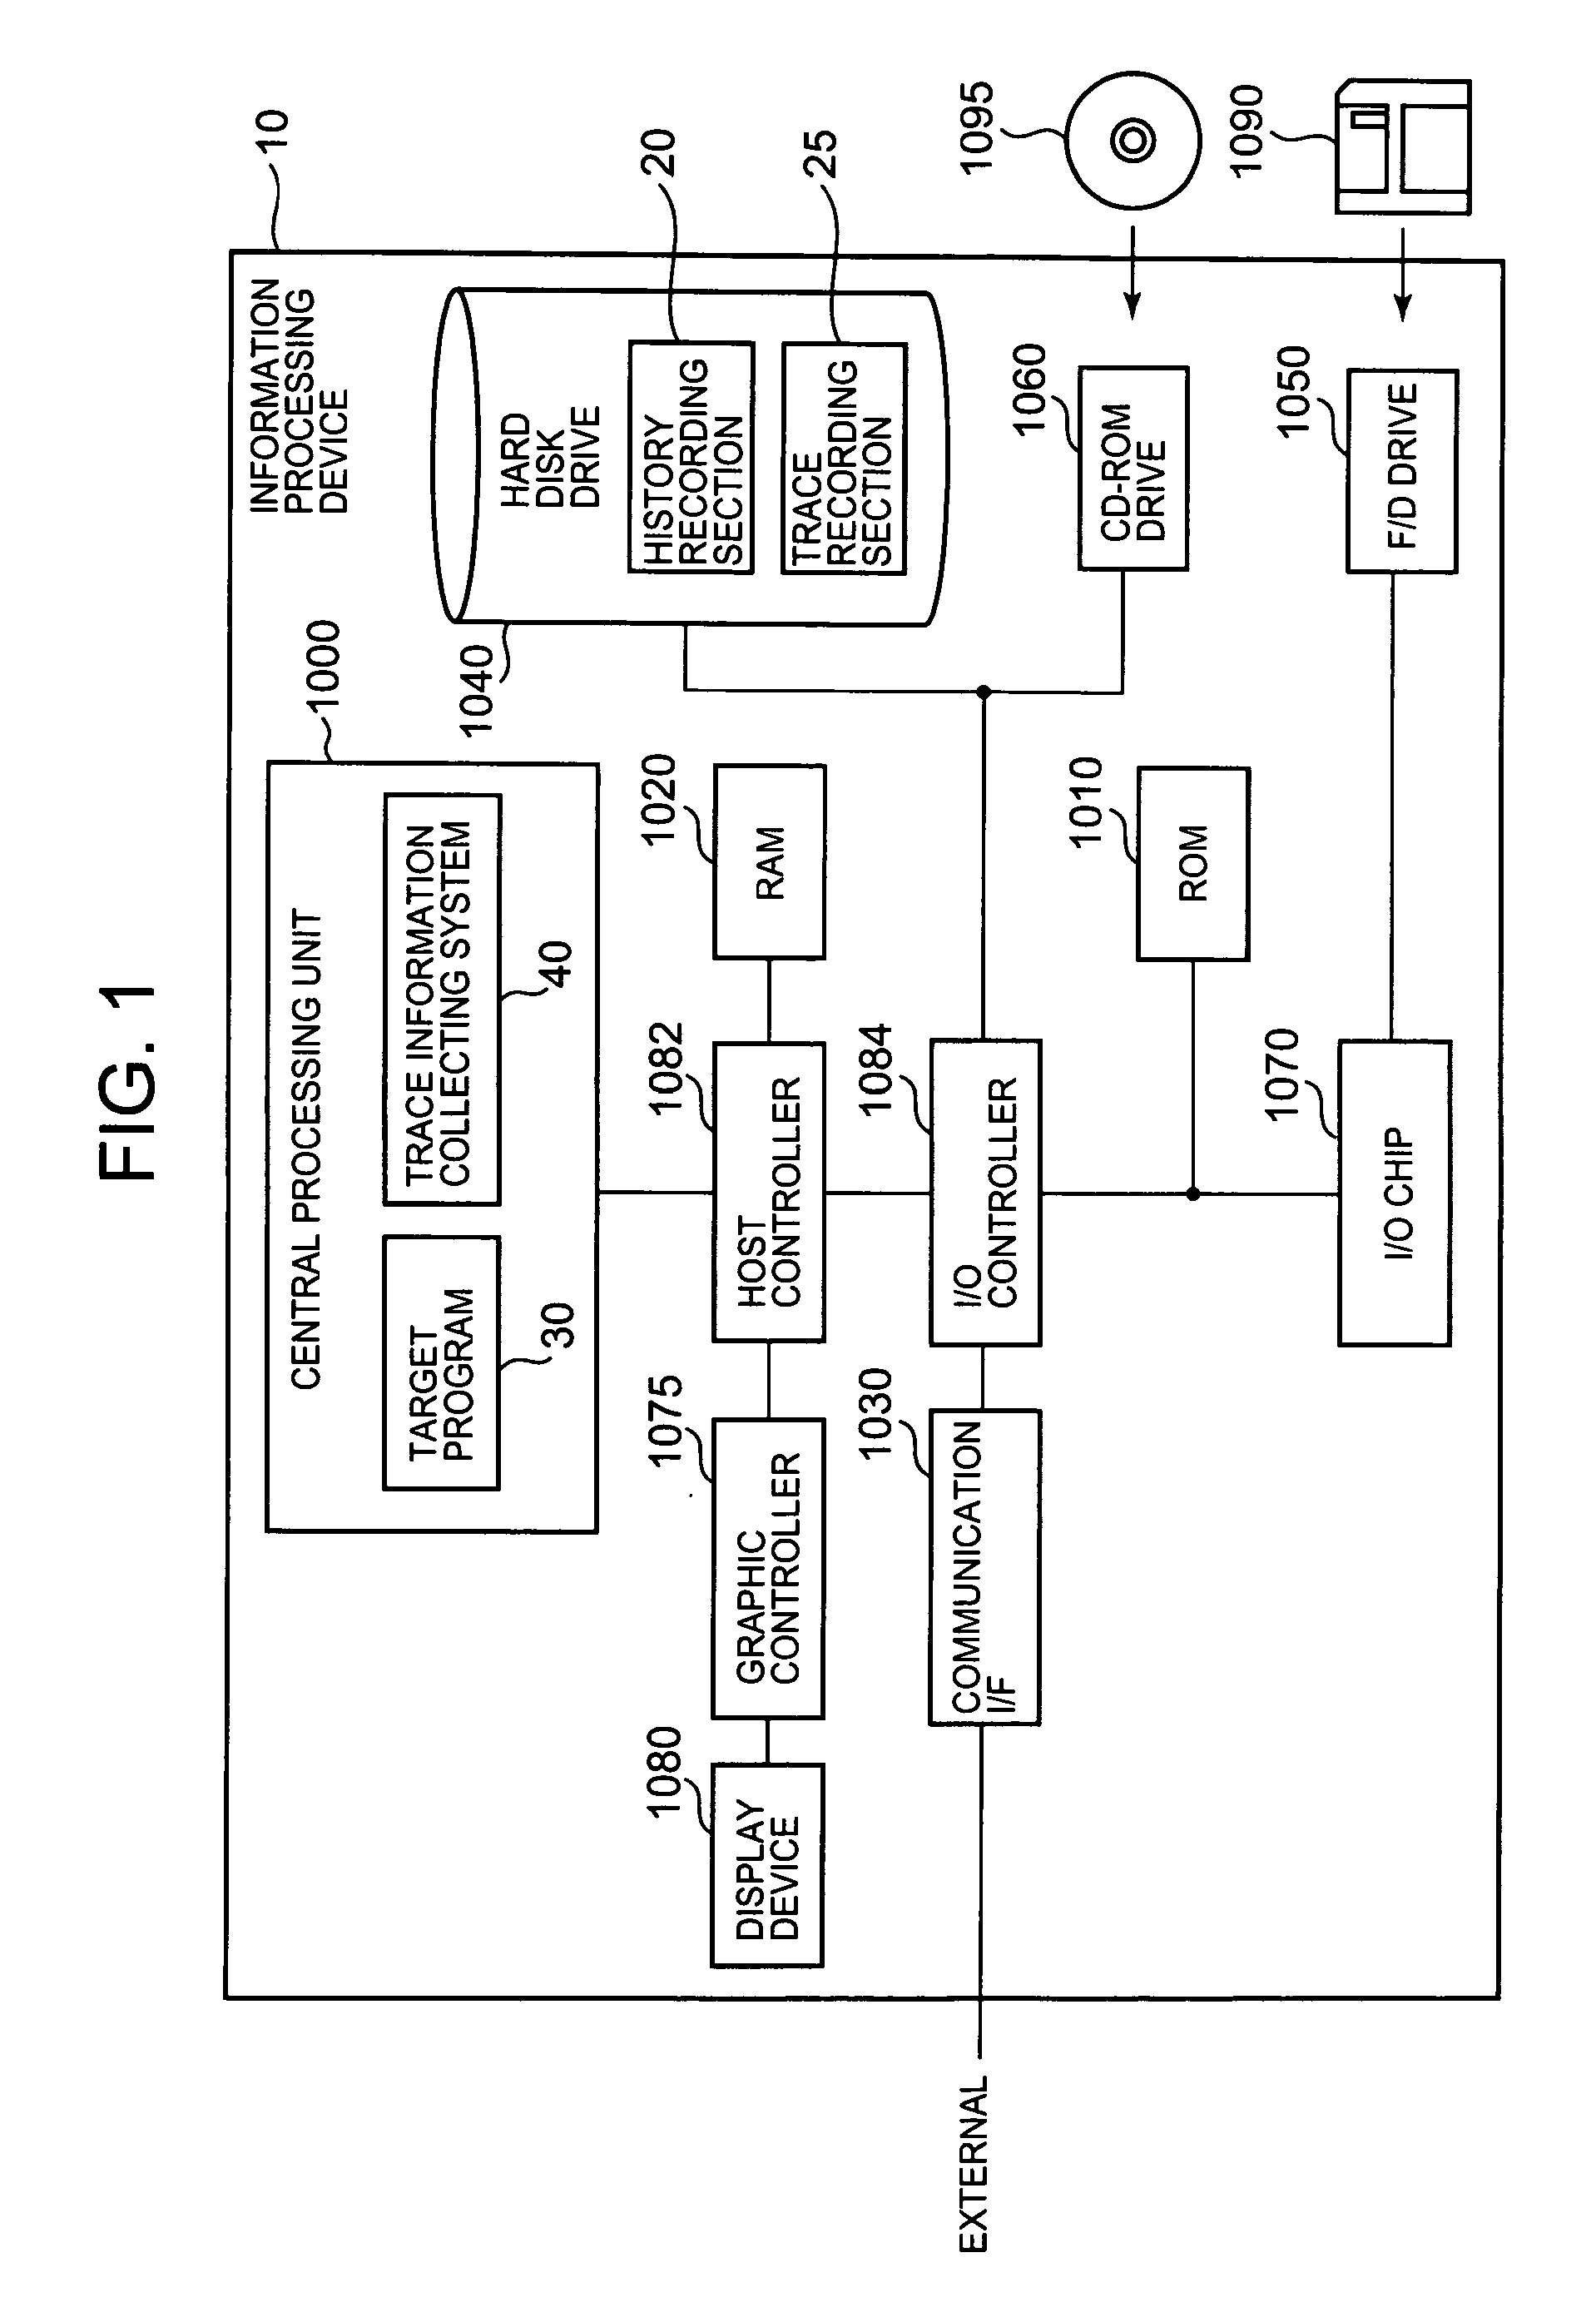 Trace information collecting system and program